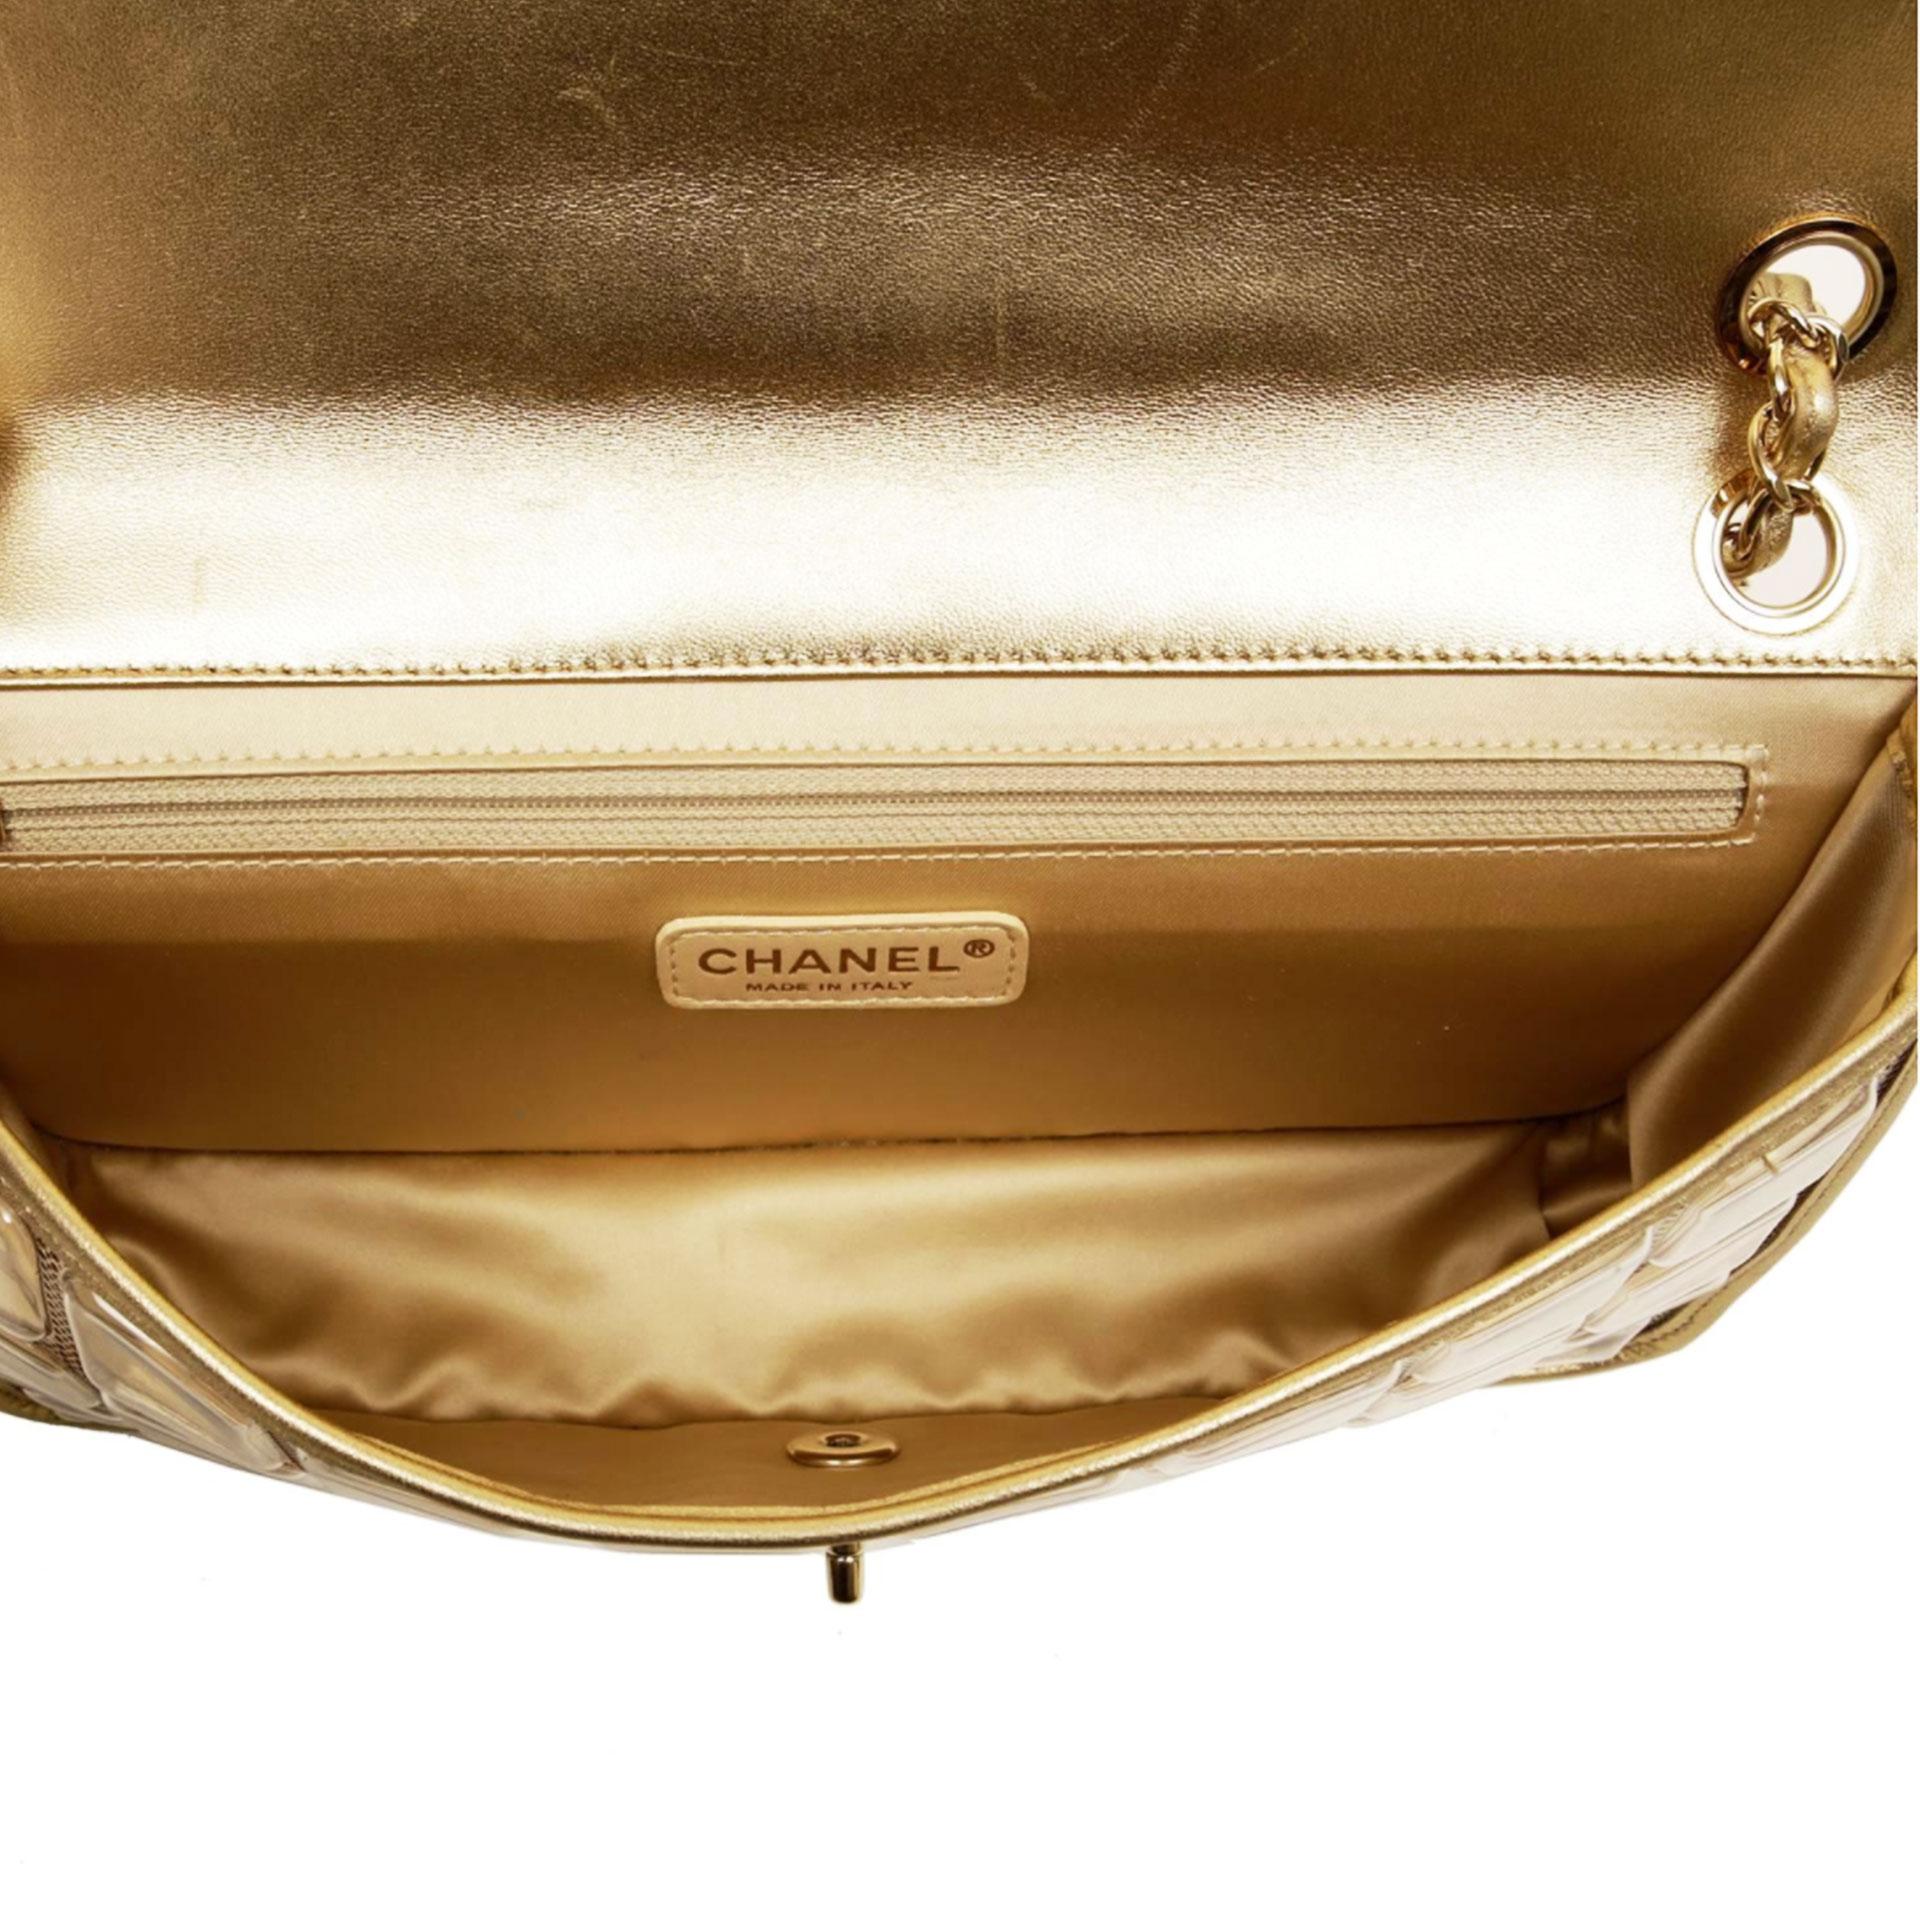 Chanel Limited Edition Ice Cube Flap Metallic Gold Lambskin Leather Shoulder Bag For Sale 7